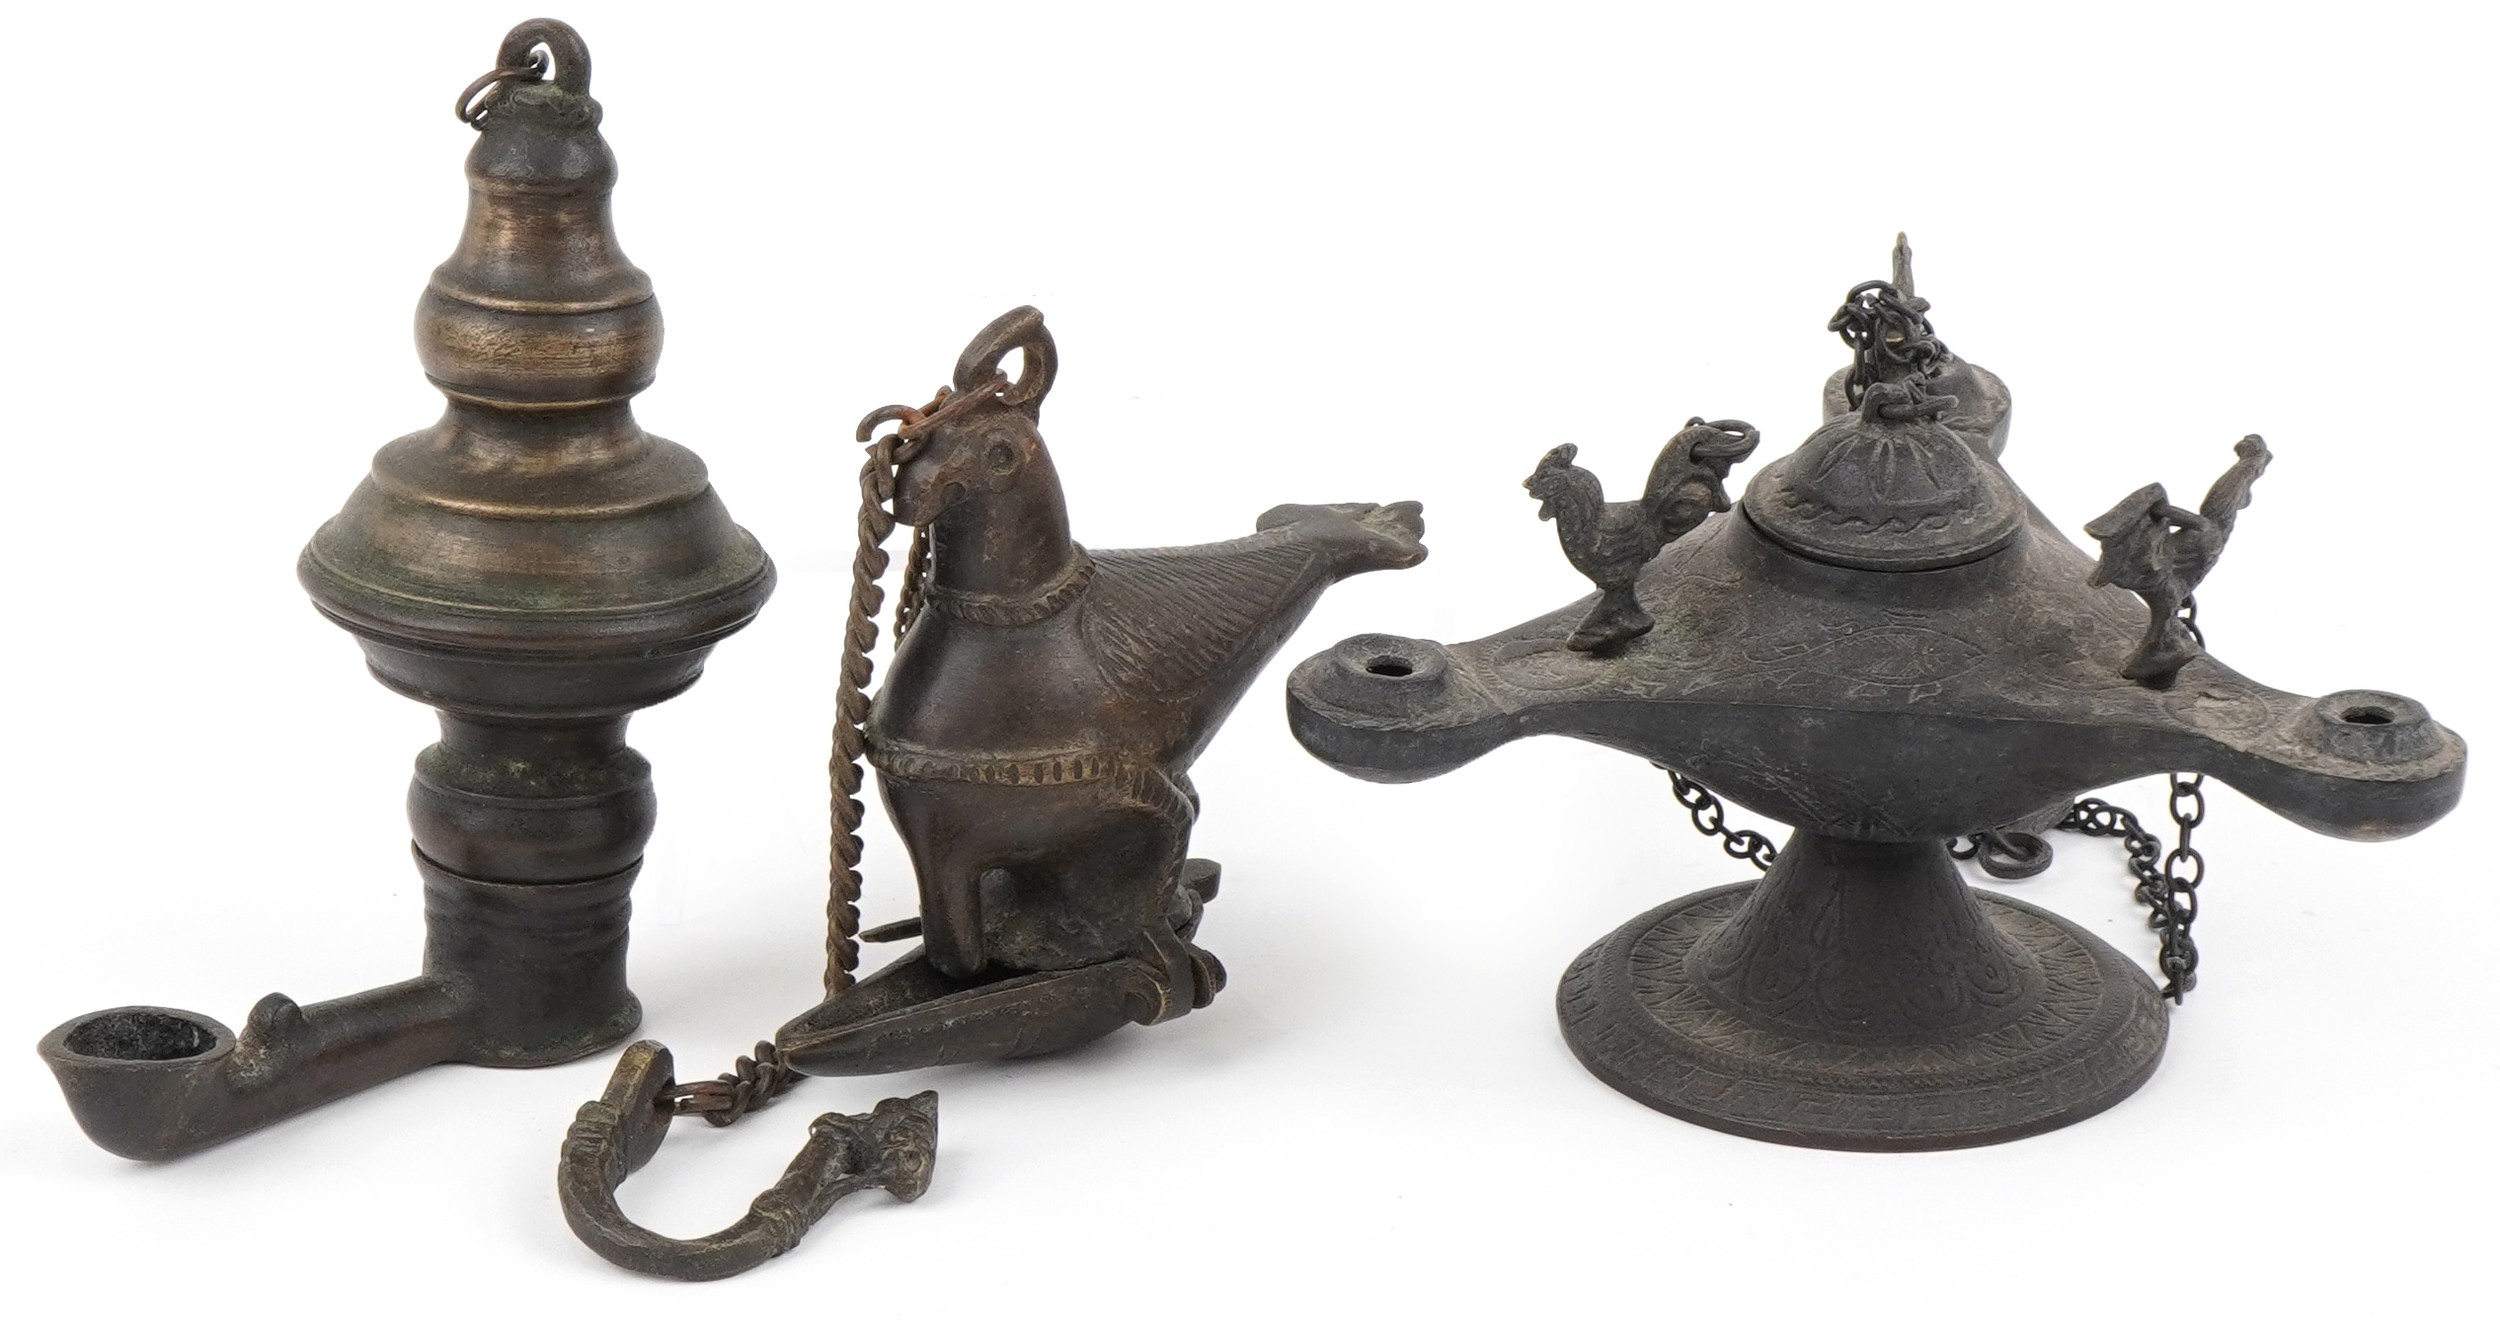 Two antique Indian bronzed hanging oil lamps, one in the form of a mythical bird and a Byzantine